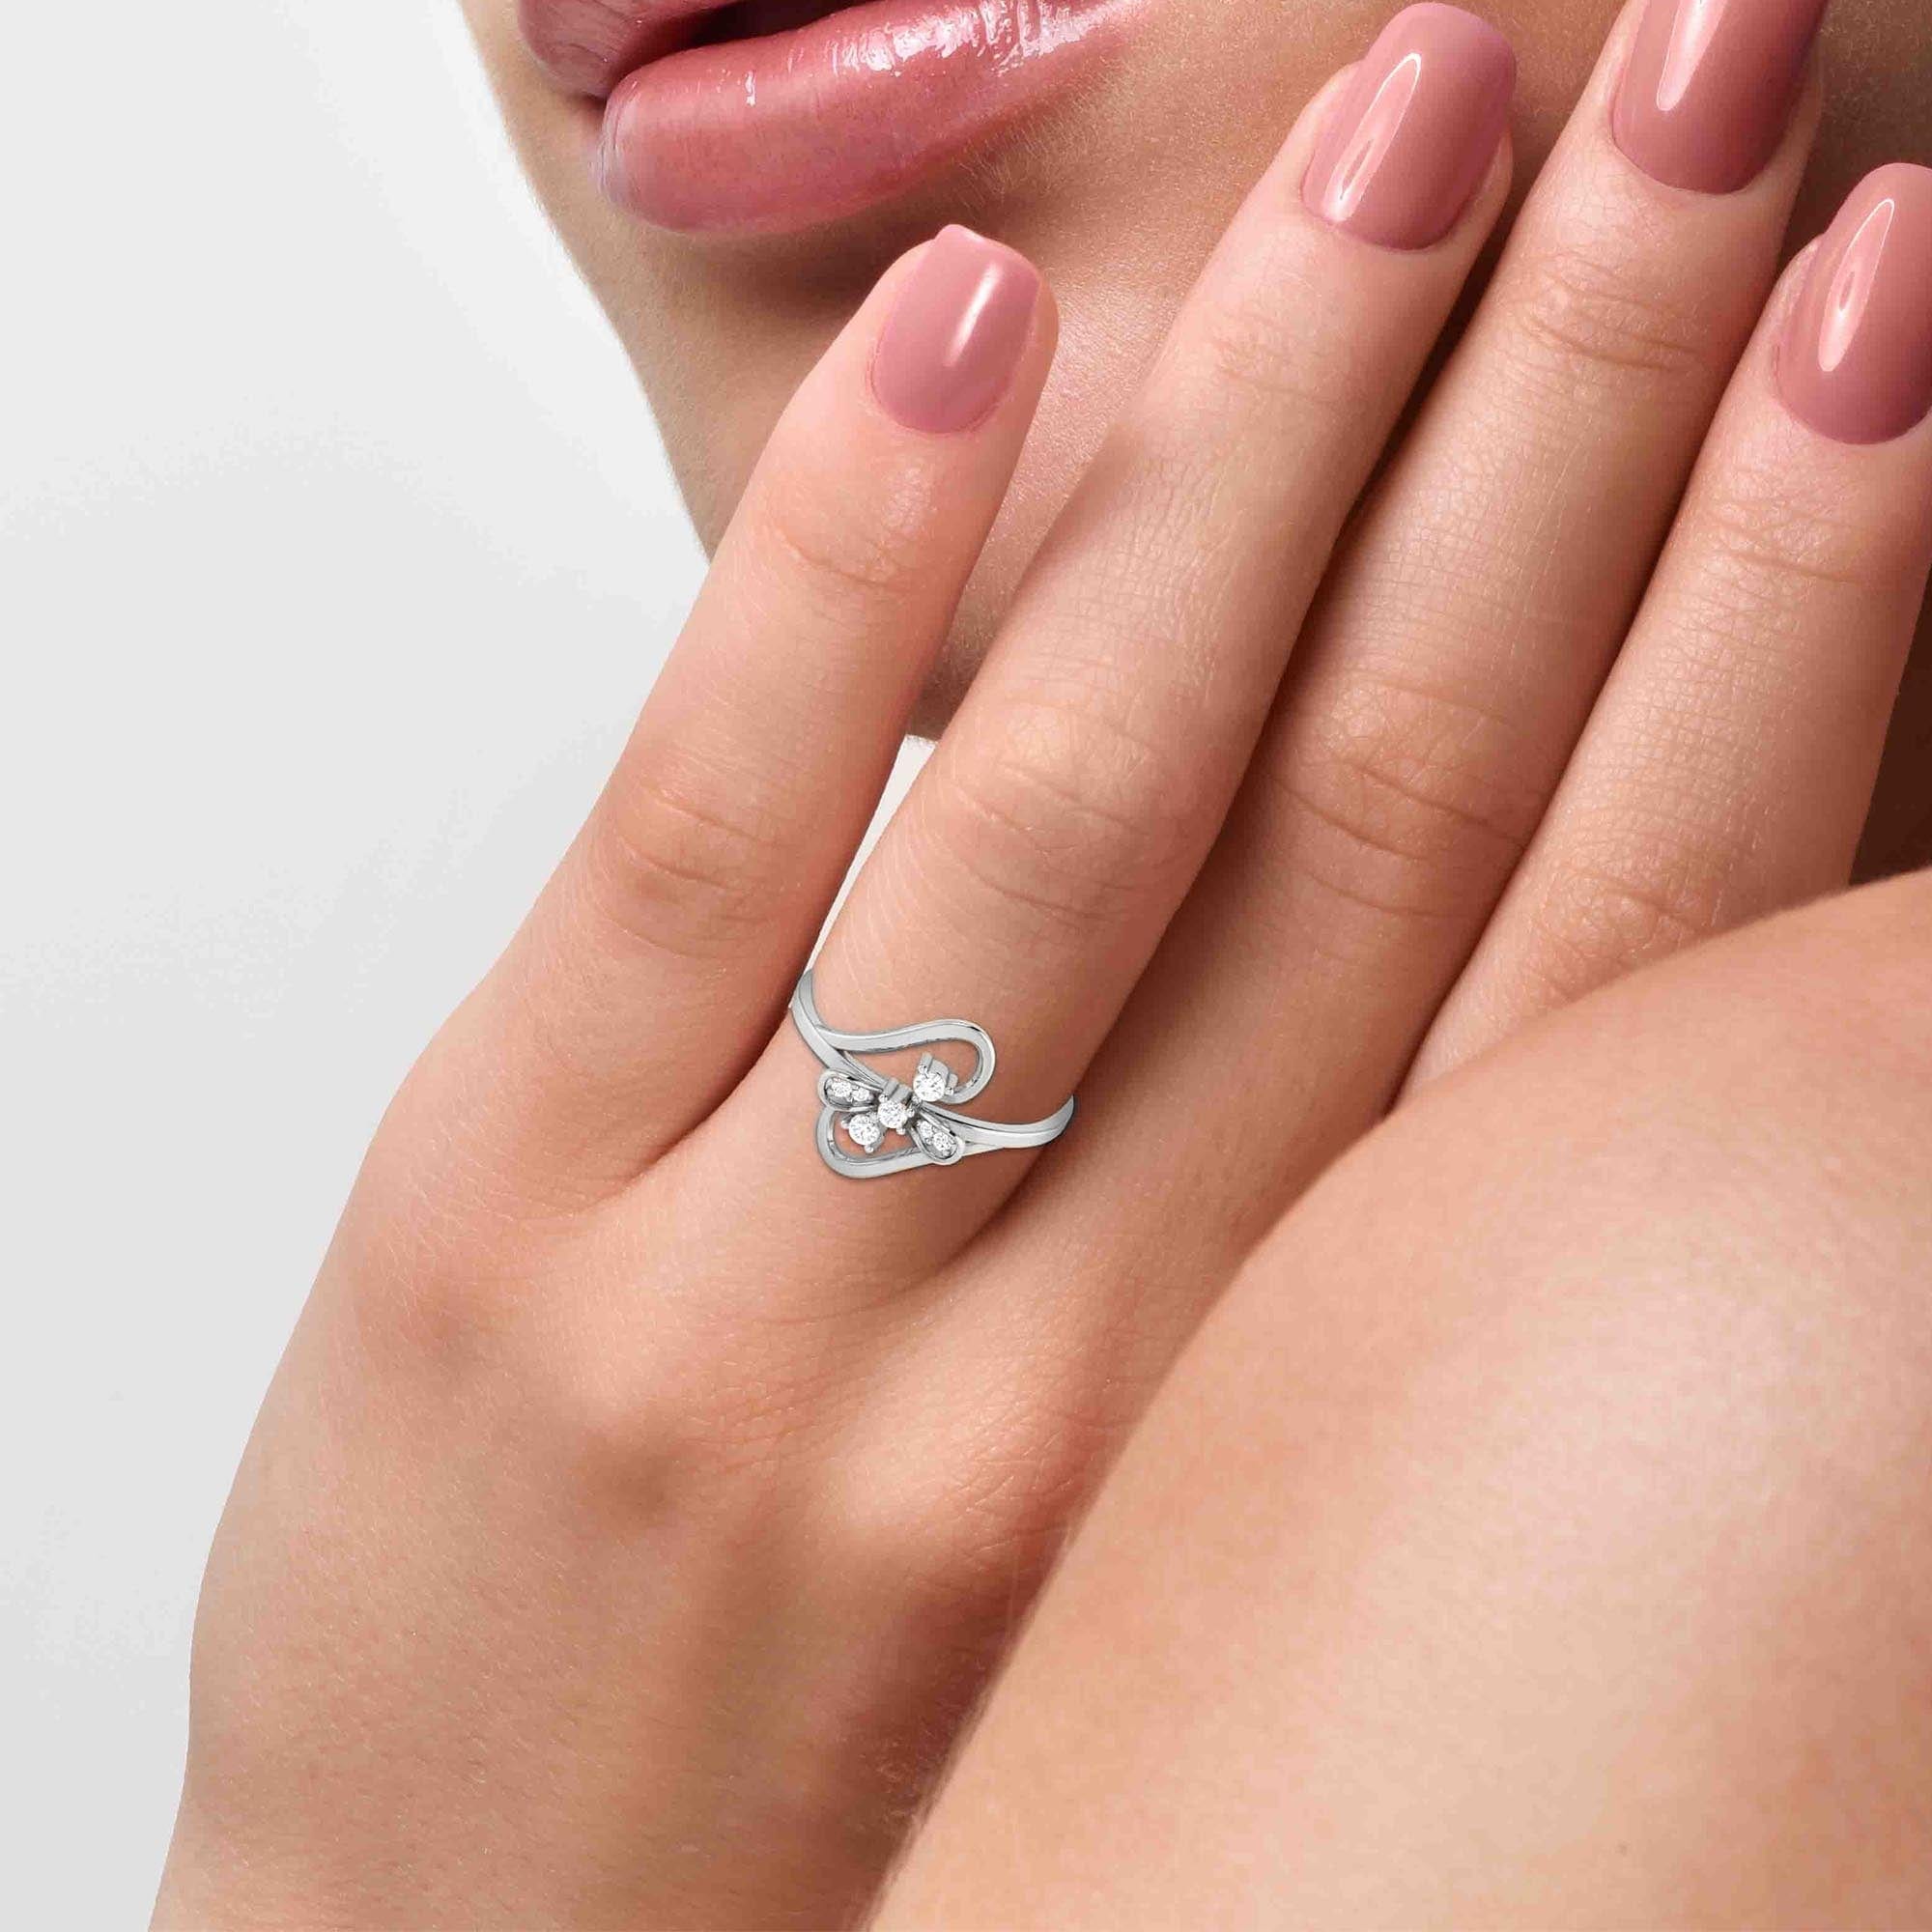 Put a Ring On It: What The Placement of Your Ring Symbolizes